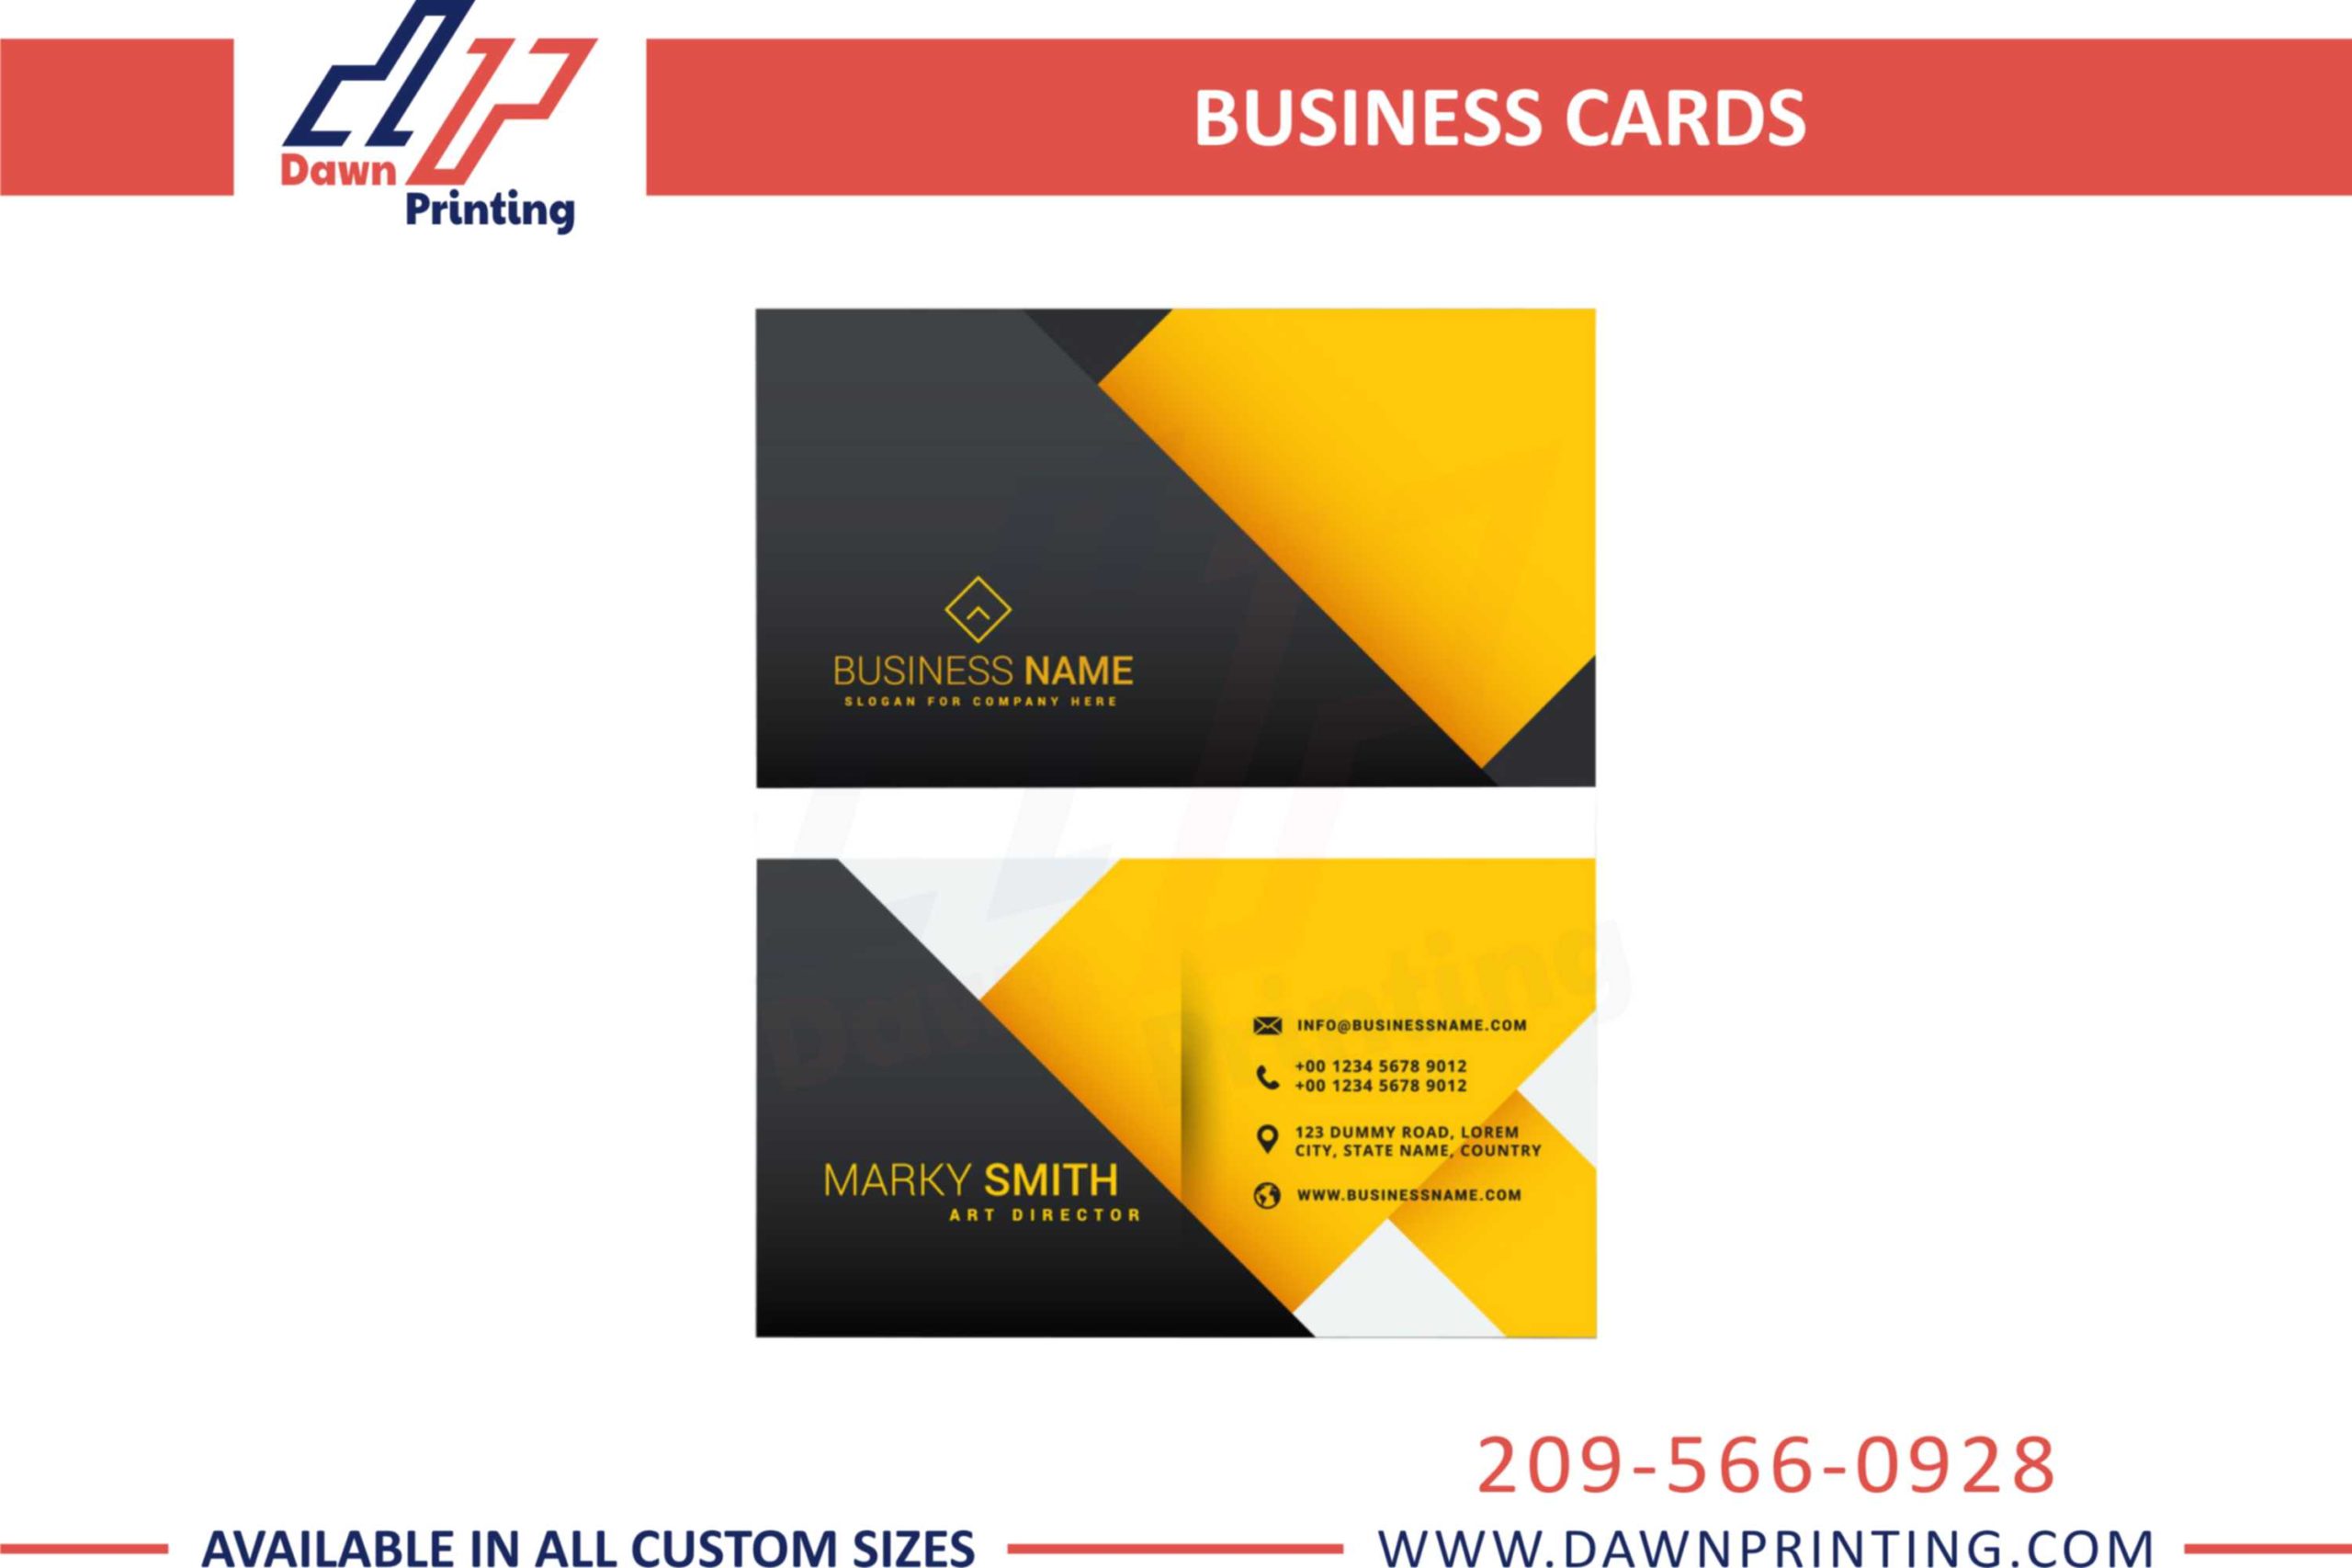 Linen Textured Business Cards - Dawn Printing